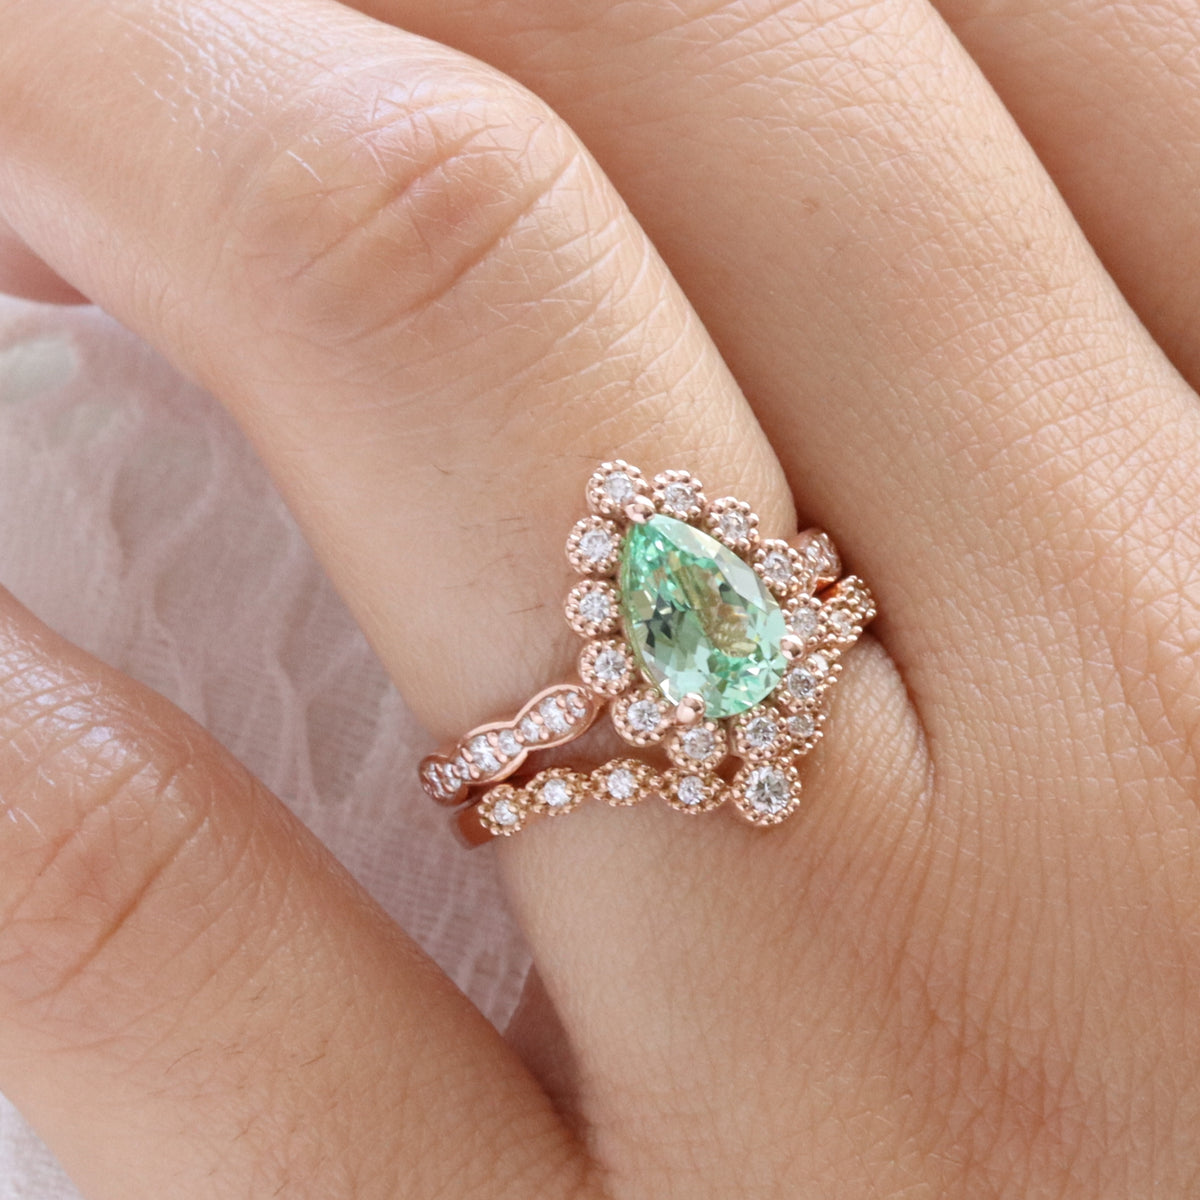 Vintage style pear green sapphire ring stack rose gold curved diamond wedding ring bridal set la more design jewelry